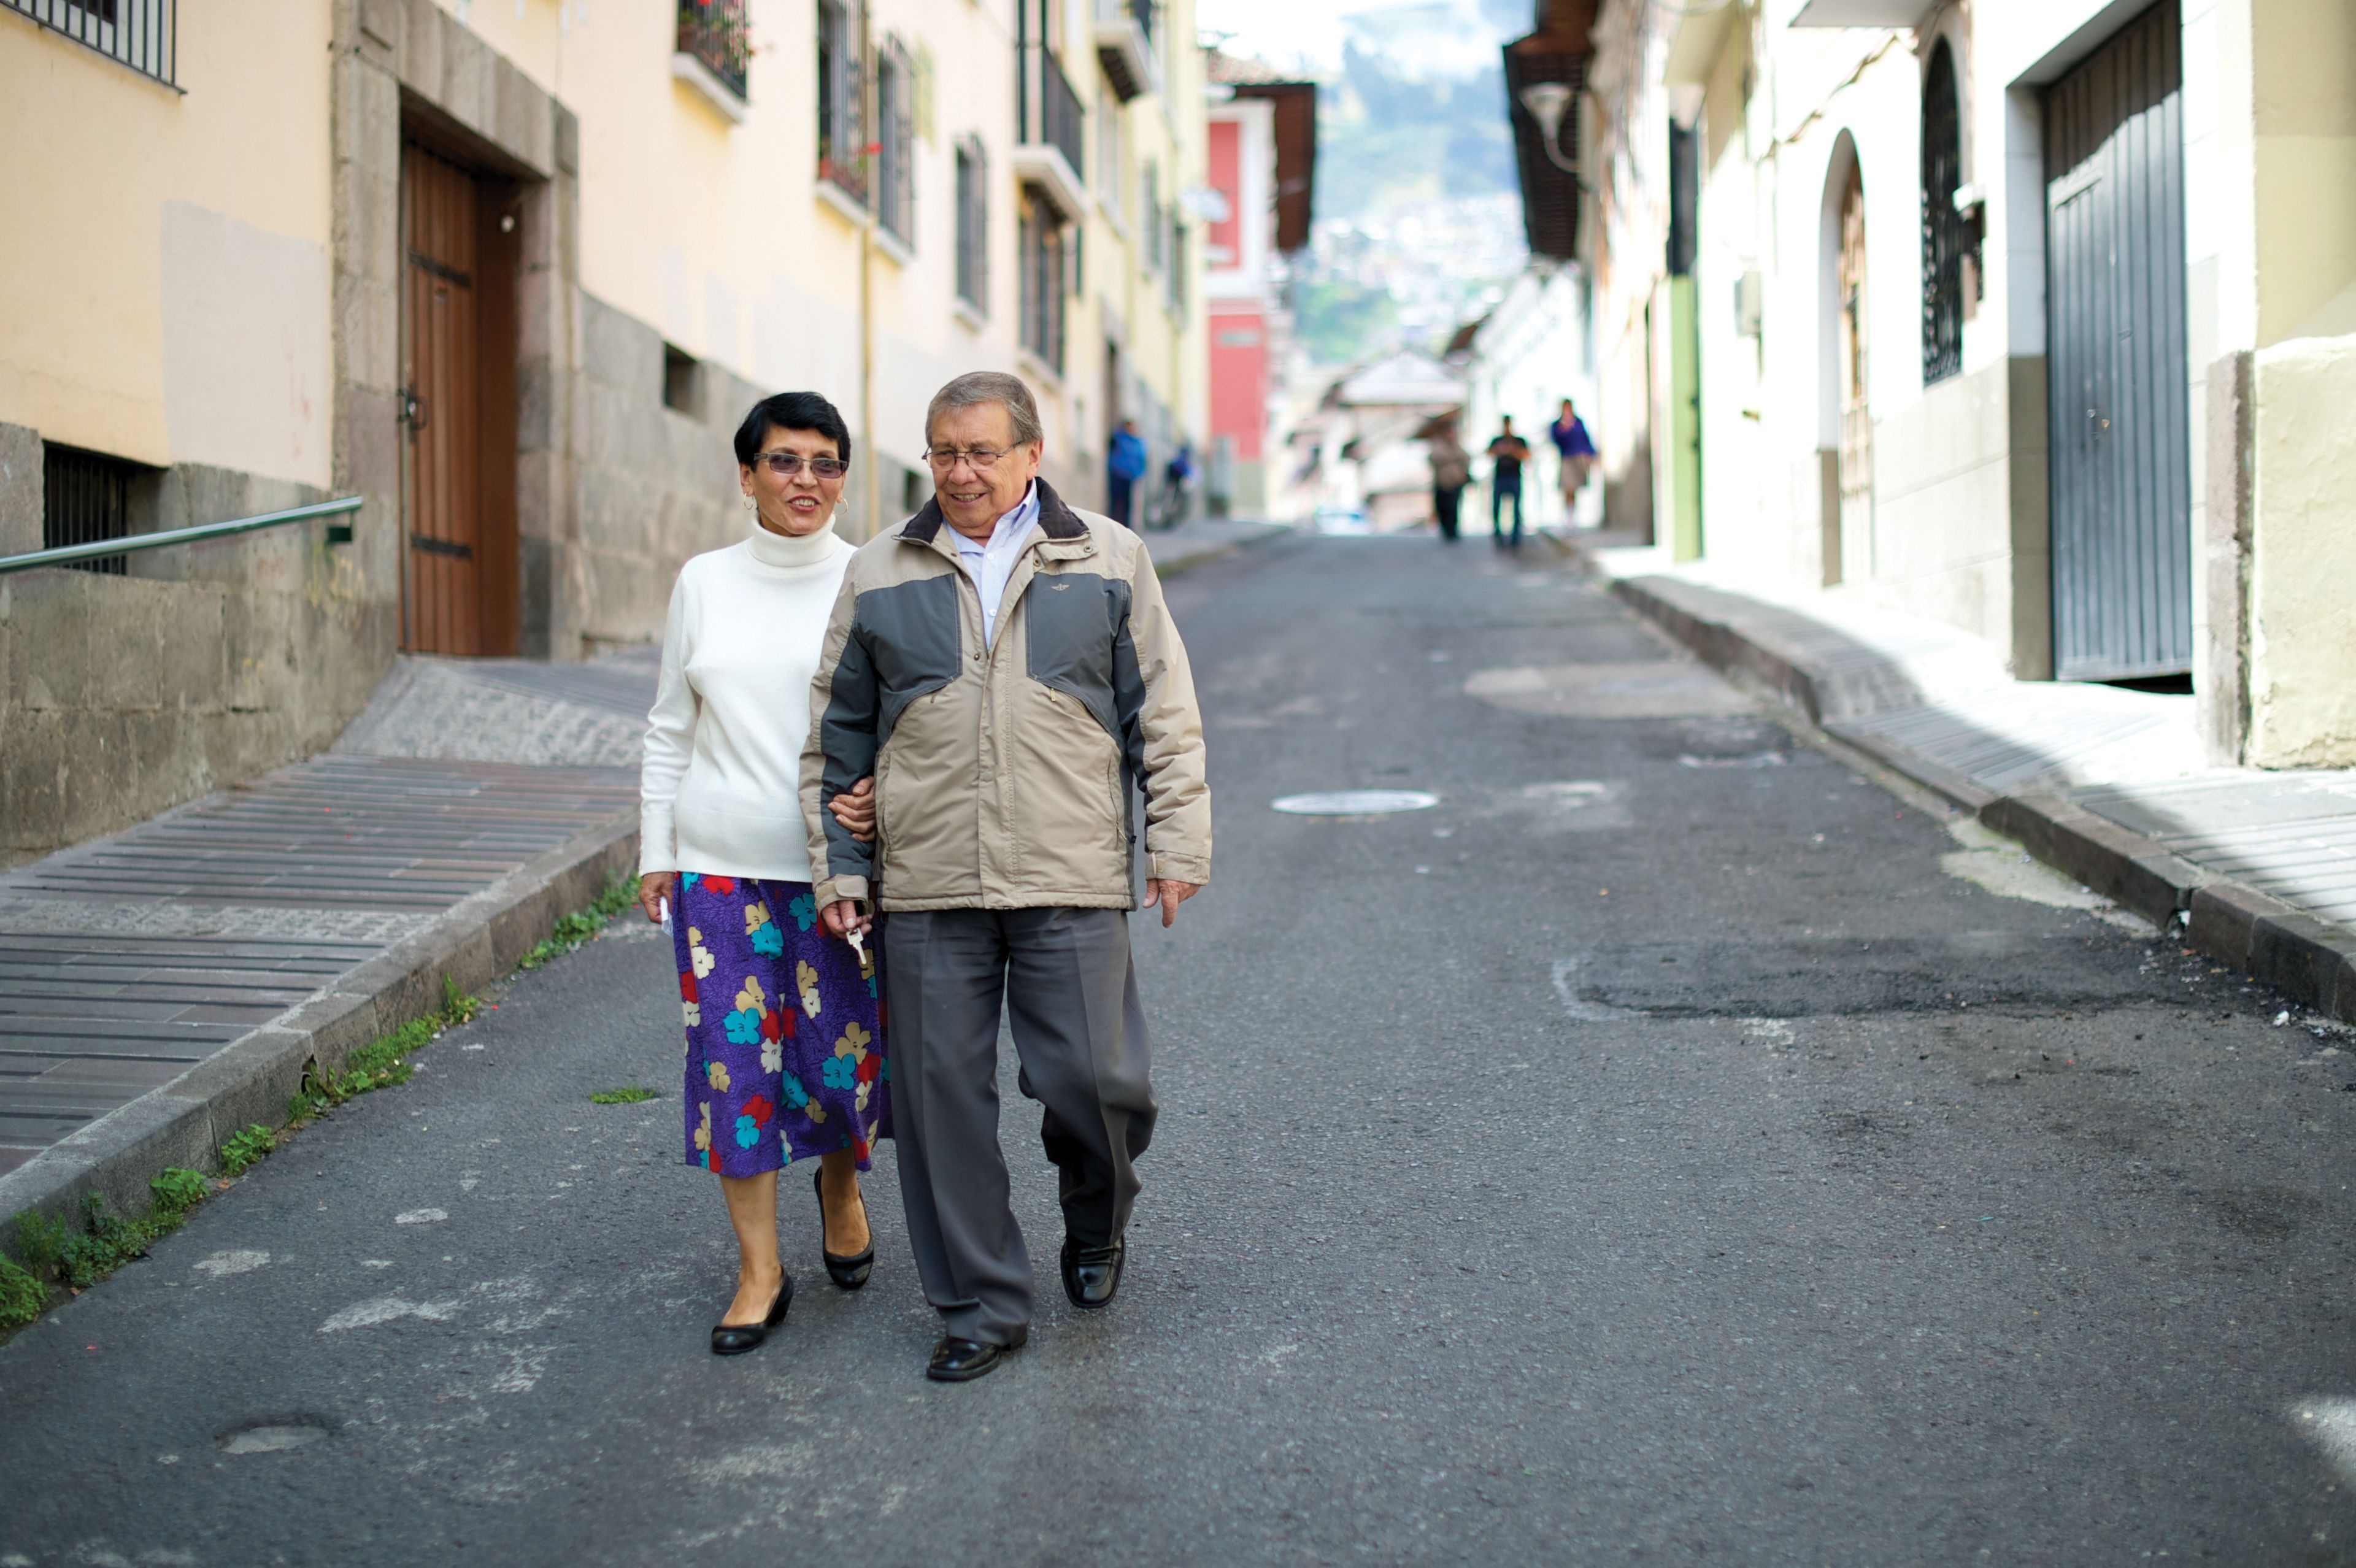 An elderly couple from Ecuador walking with linked arms down a street together.